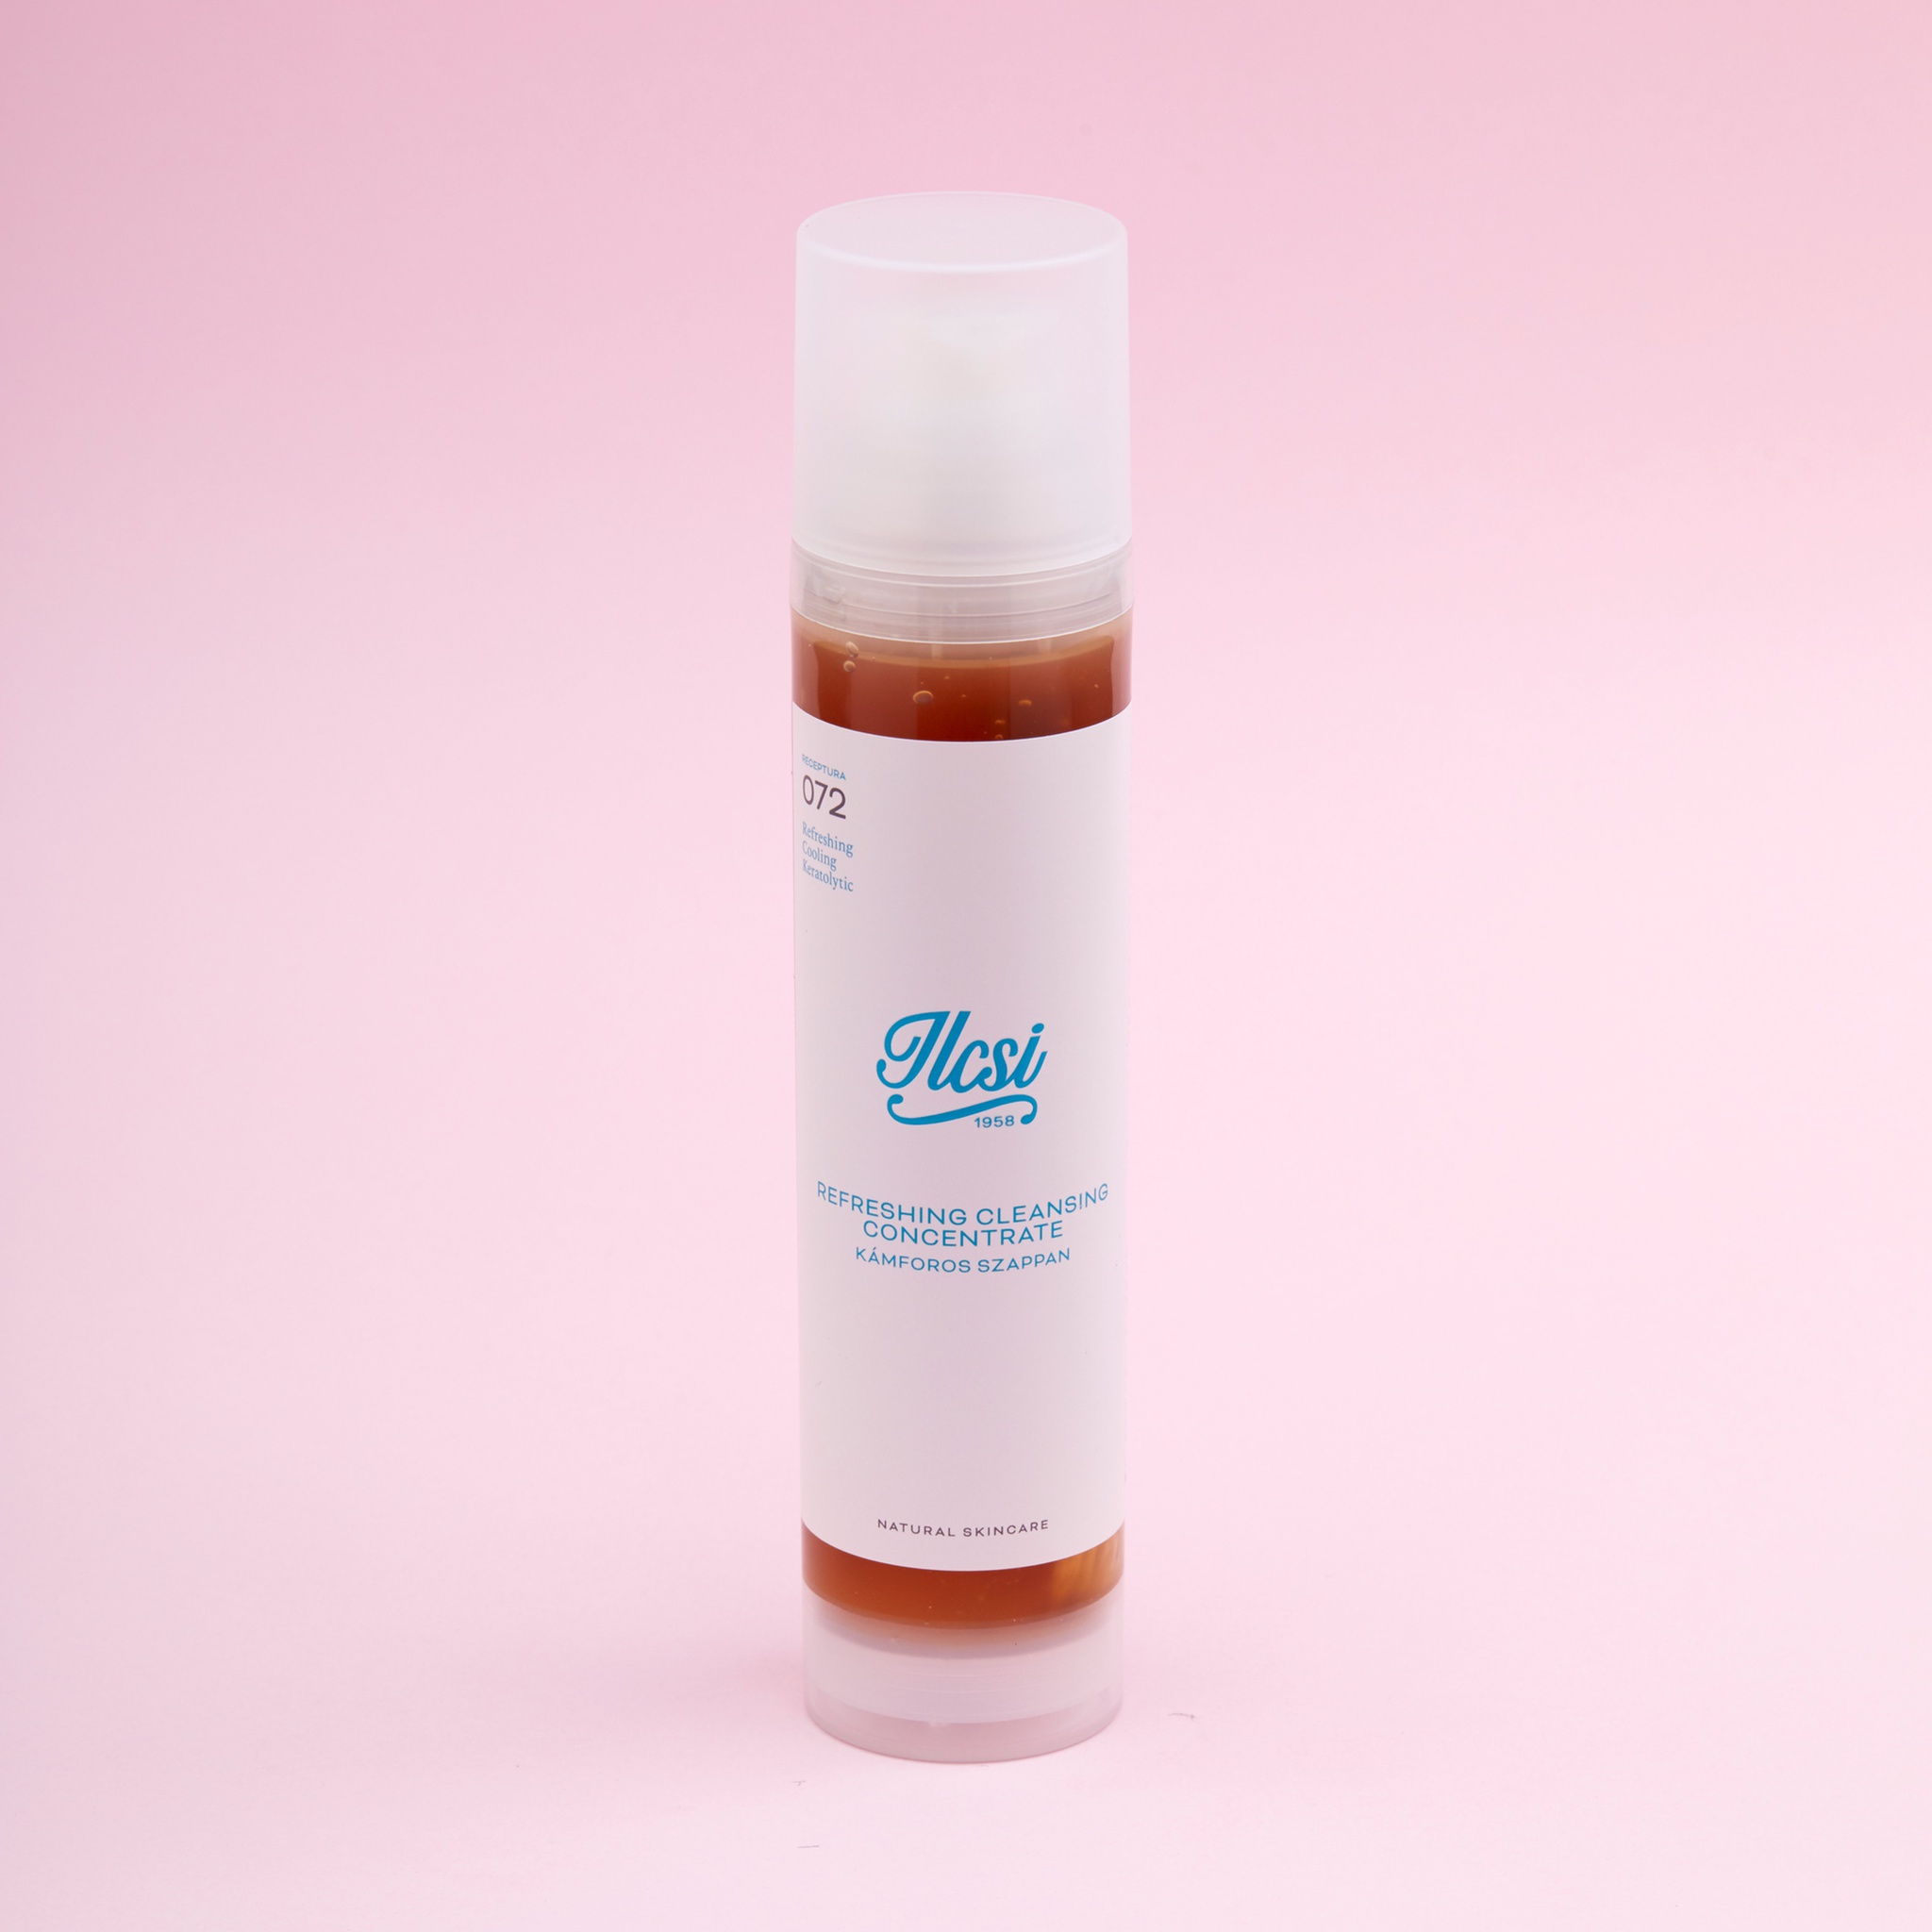 Ilcsi Refreshing Cleansing Concentrate